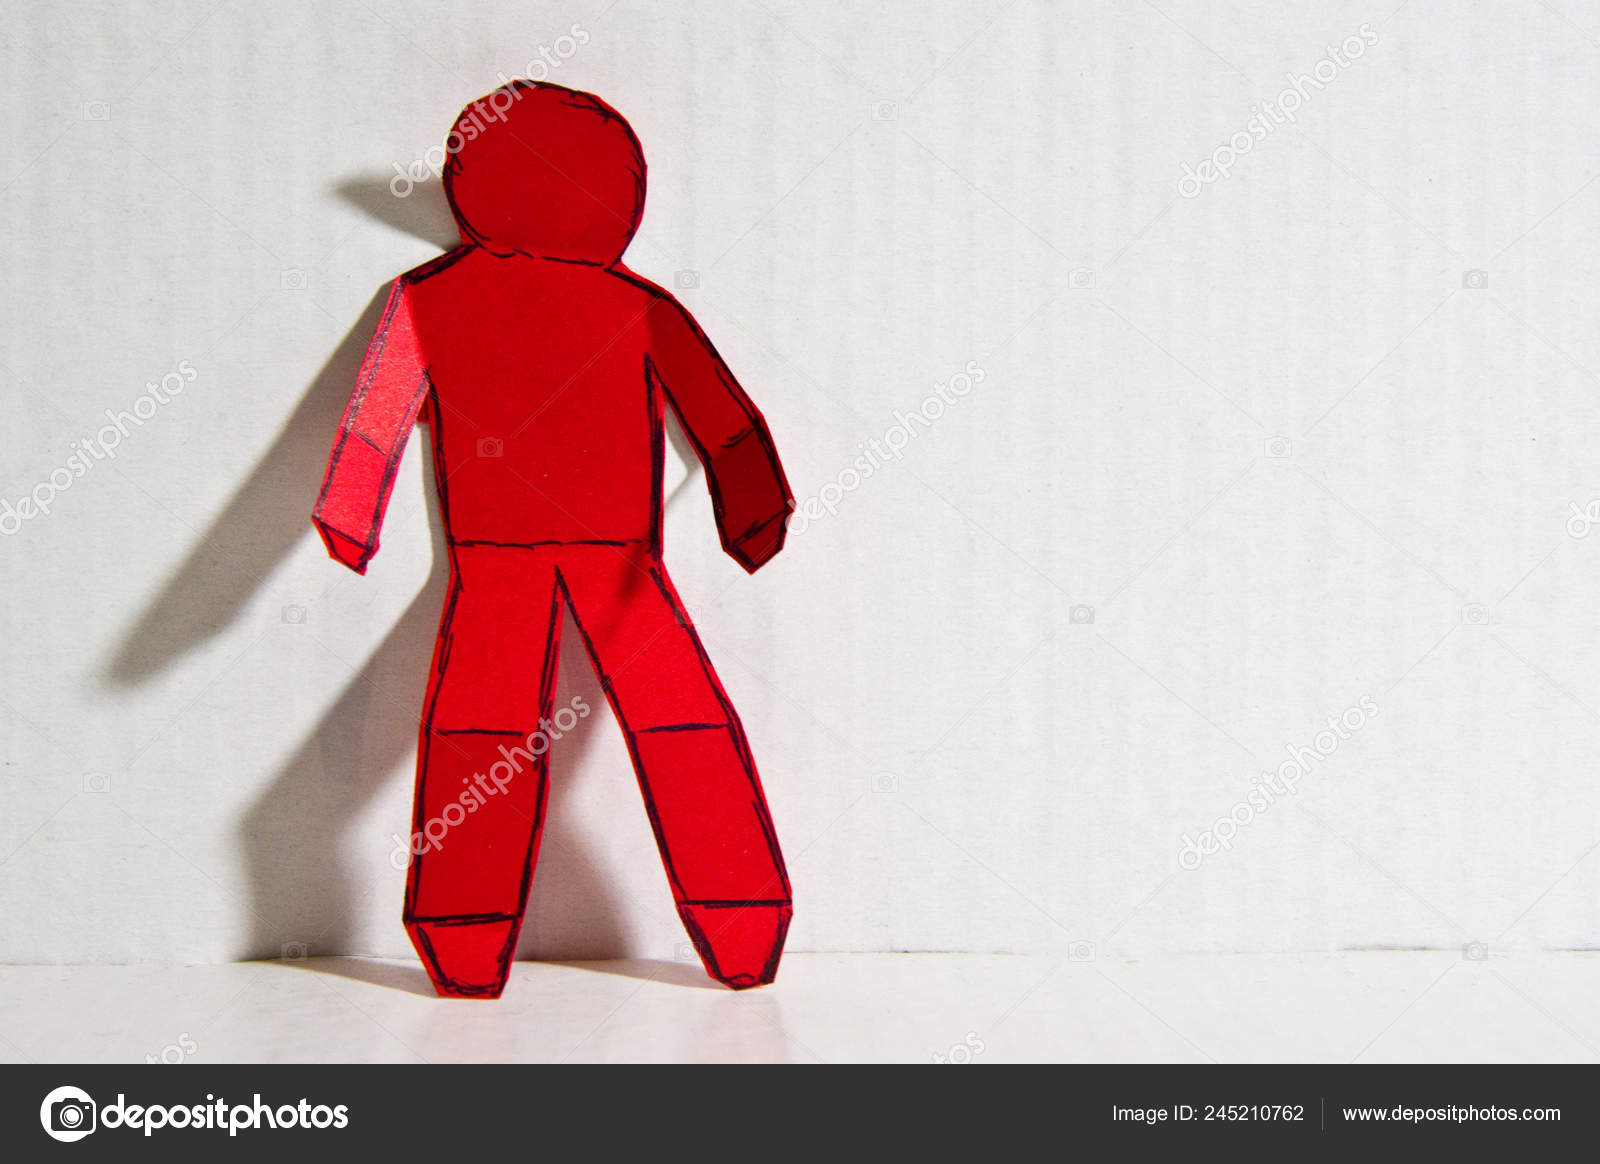 Abstract Image Lonely Man Made Paper Cutout Wall Stock Photo by